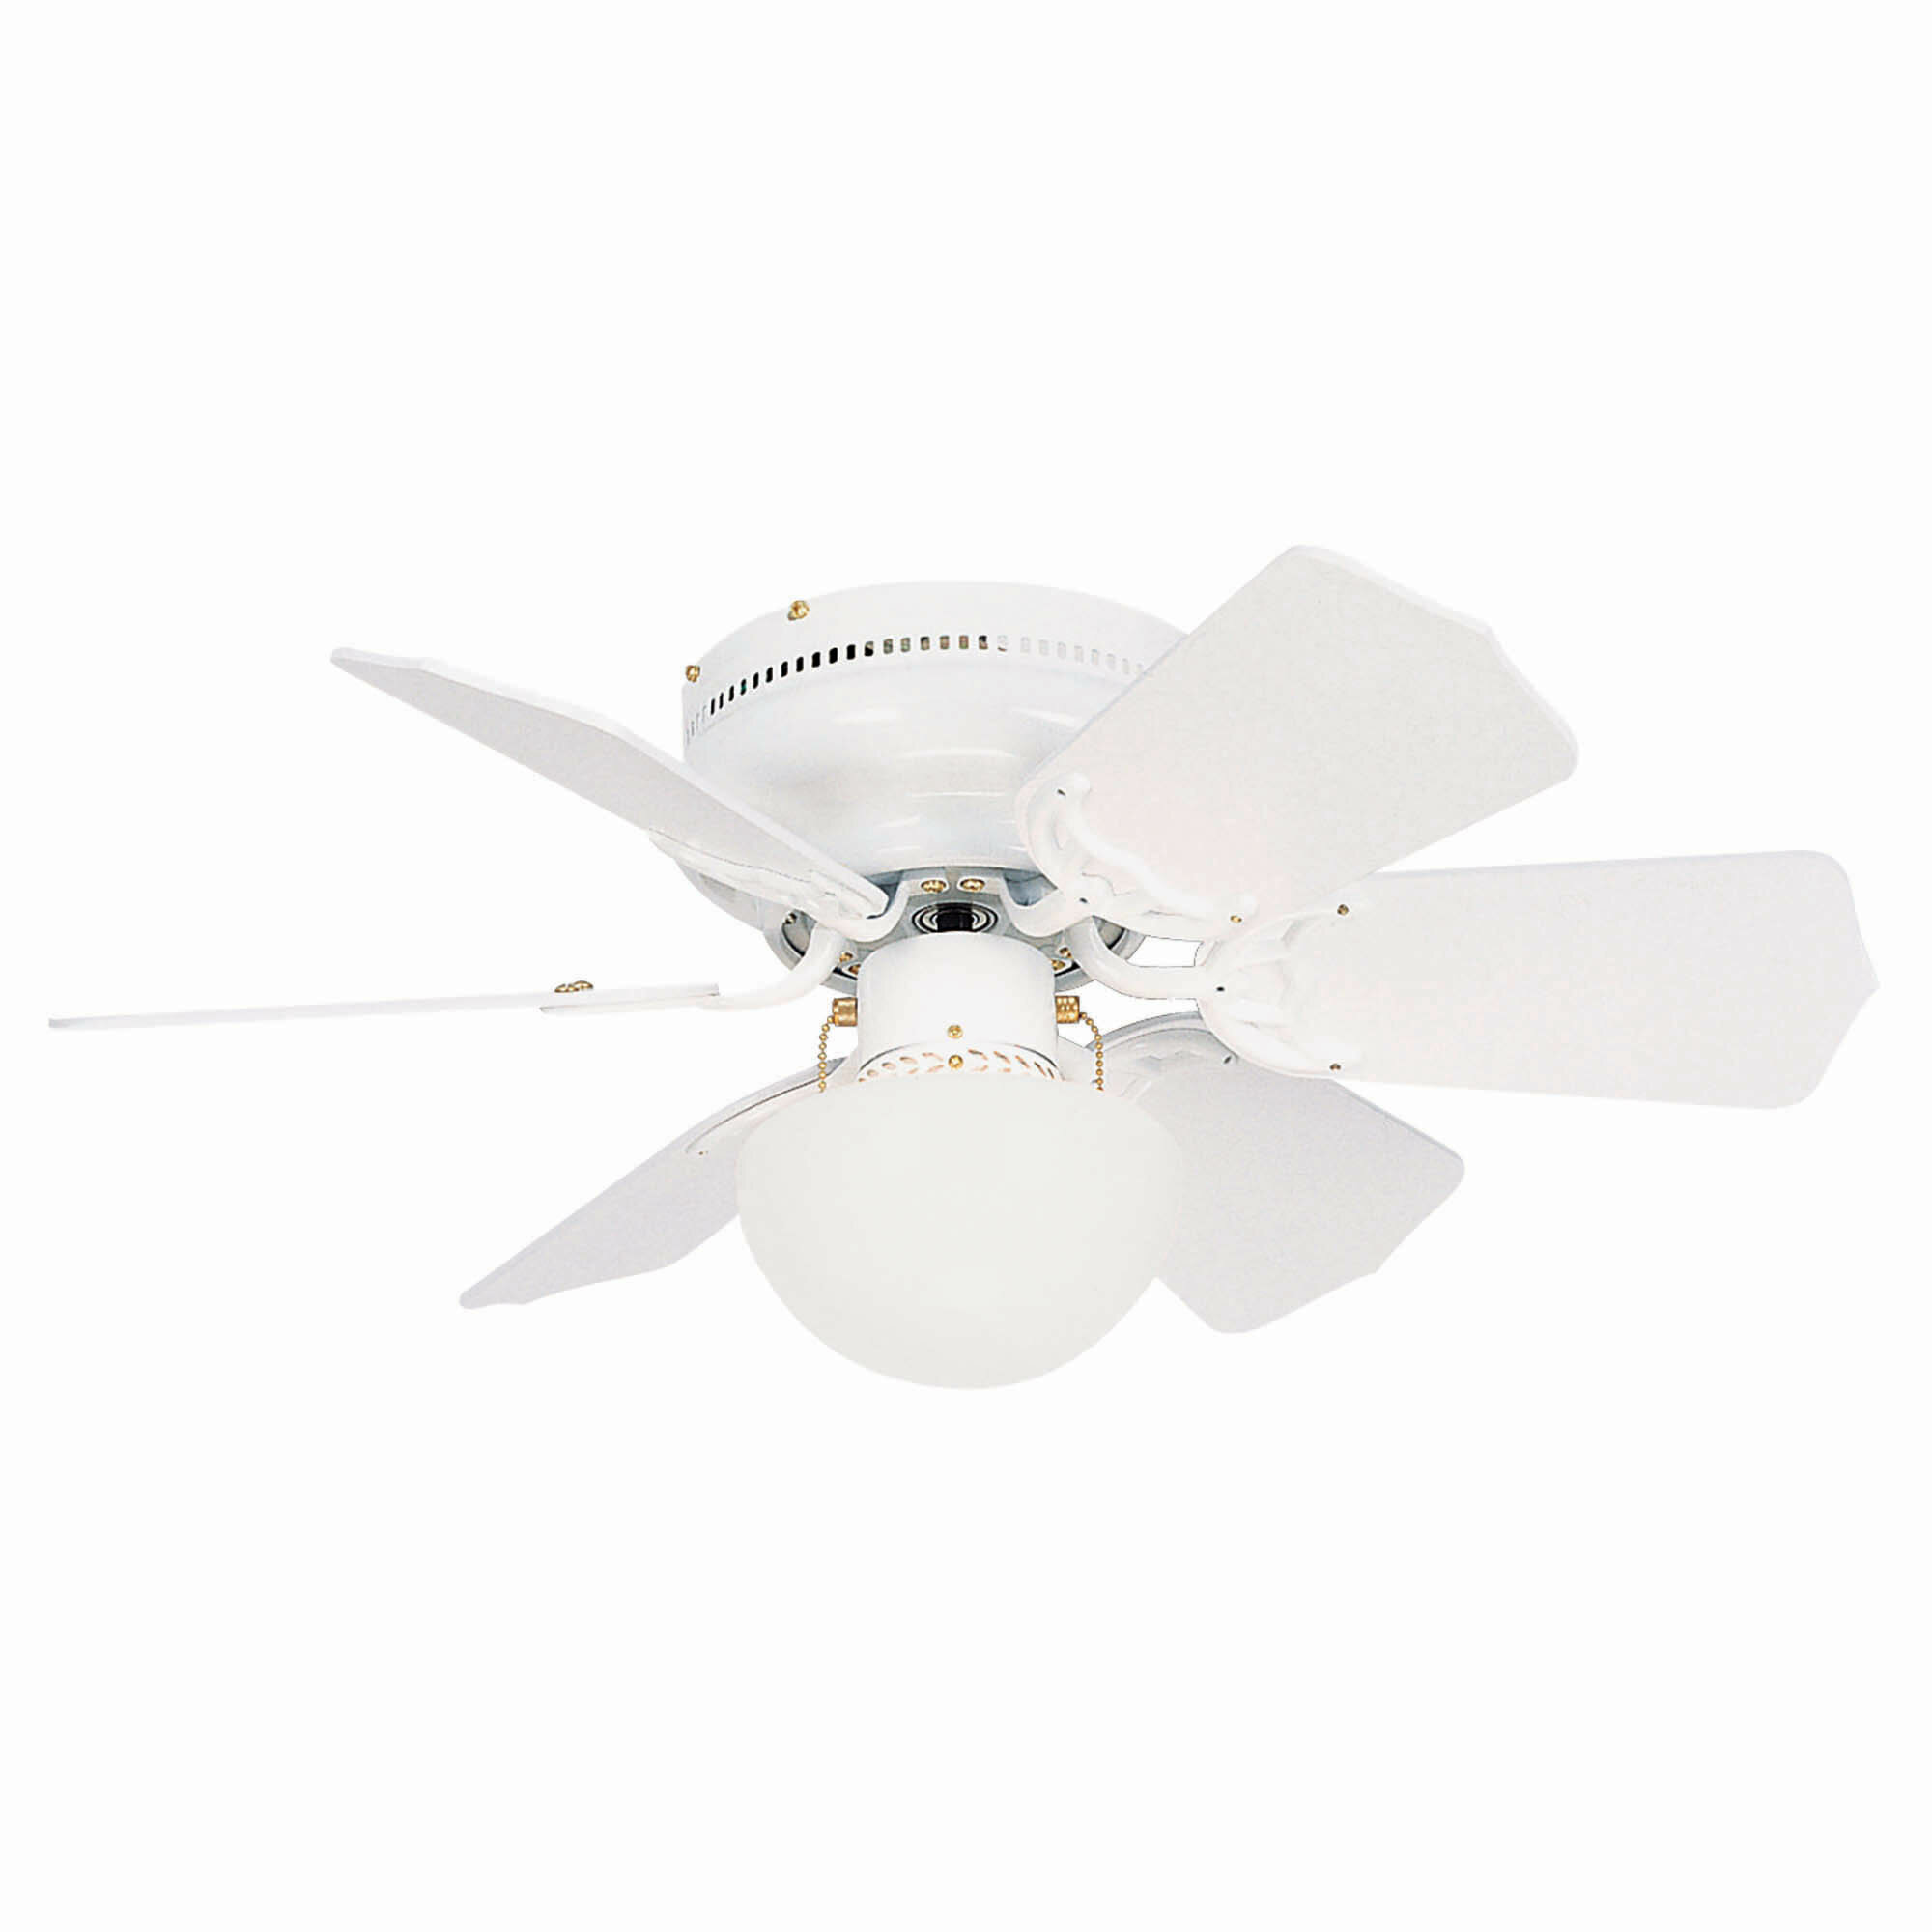 Andover Mills 30 Gatun 6 Blade Led Standard Ceiling Fan With Pull Chain And Light Kit Included Reviews Wayfairca